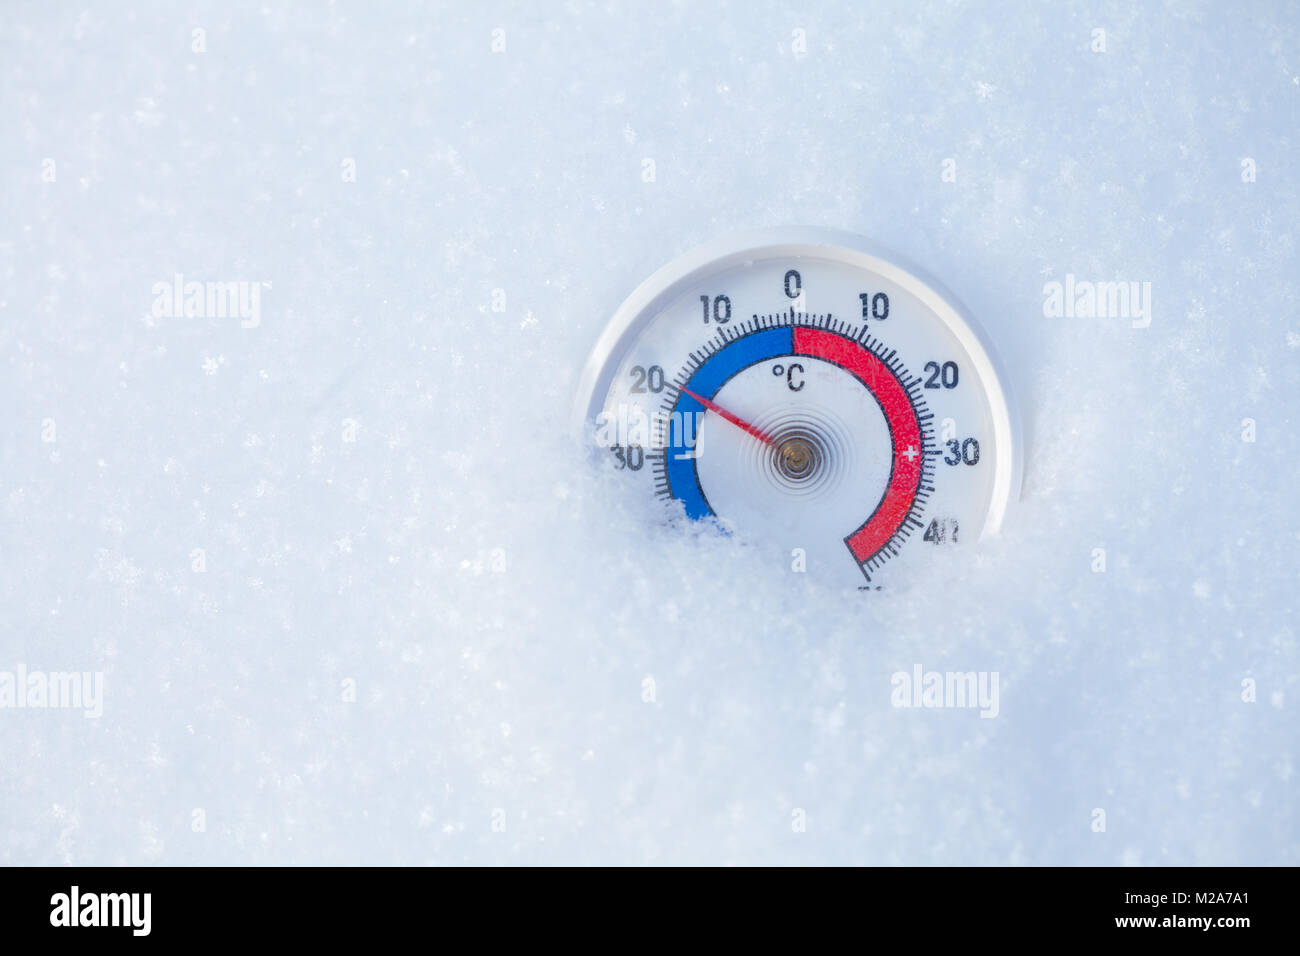 Thermometer with celsius scale placed in a fresh snow showing sub-zero temperature minus 20 degree - cold winter weather concept Stock Photo